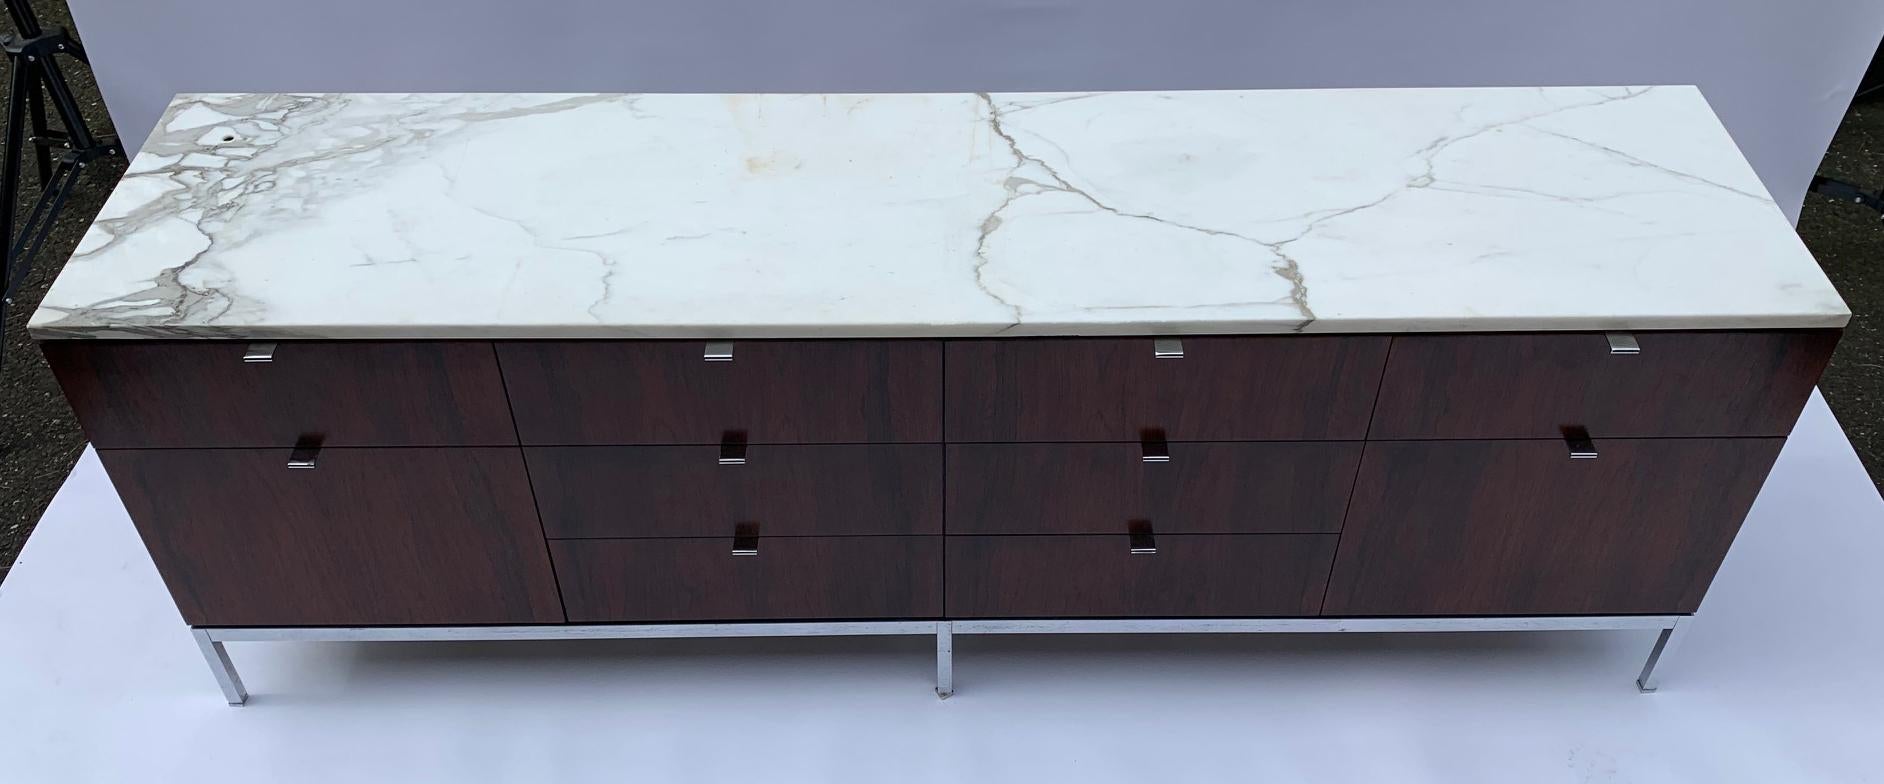 A stunning and Classic design by the late Florence Knoll having 10 drawers including 2 file drawers, a smalls organizer and white dividers throughout.
Outstanding overall condition having been freshly refinished. Original Knoll International